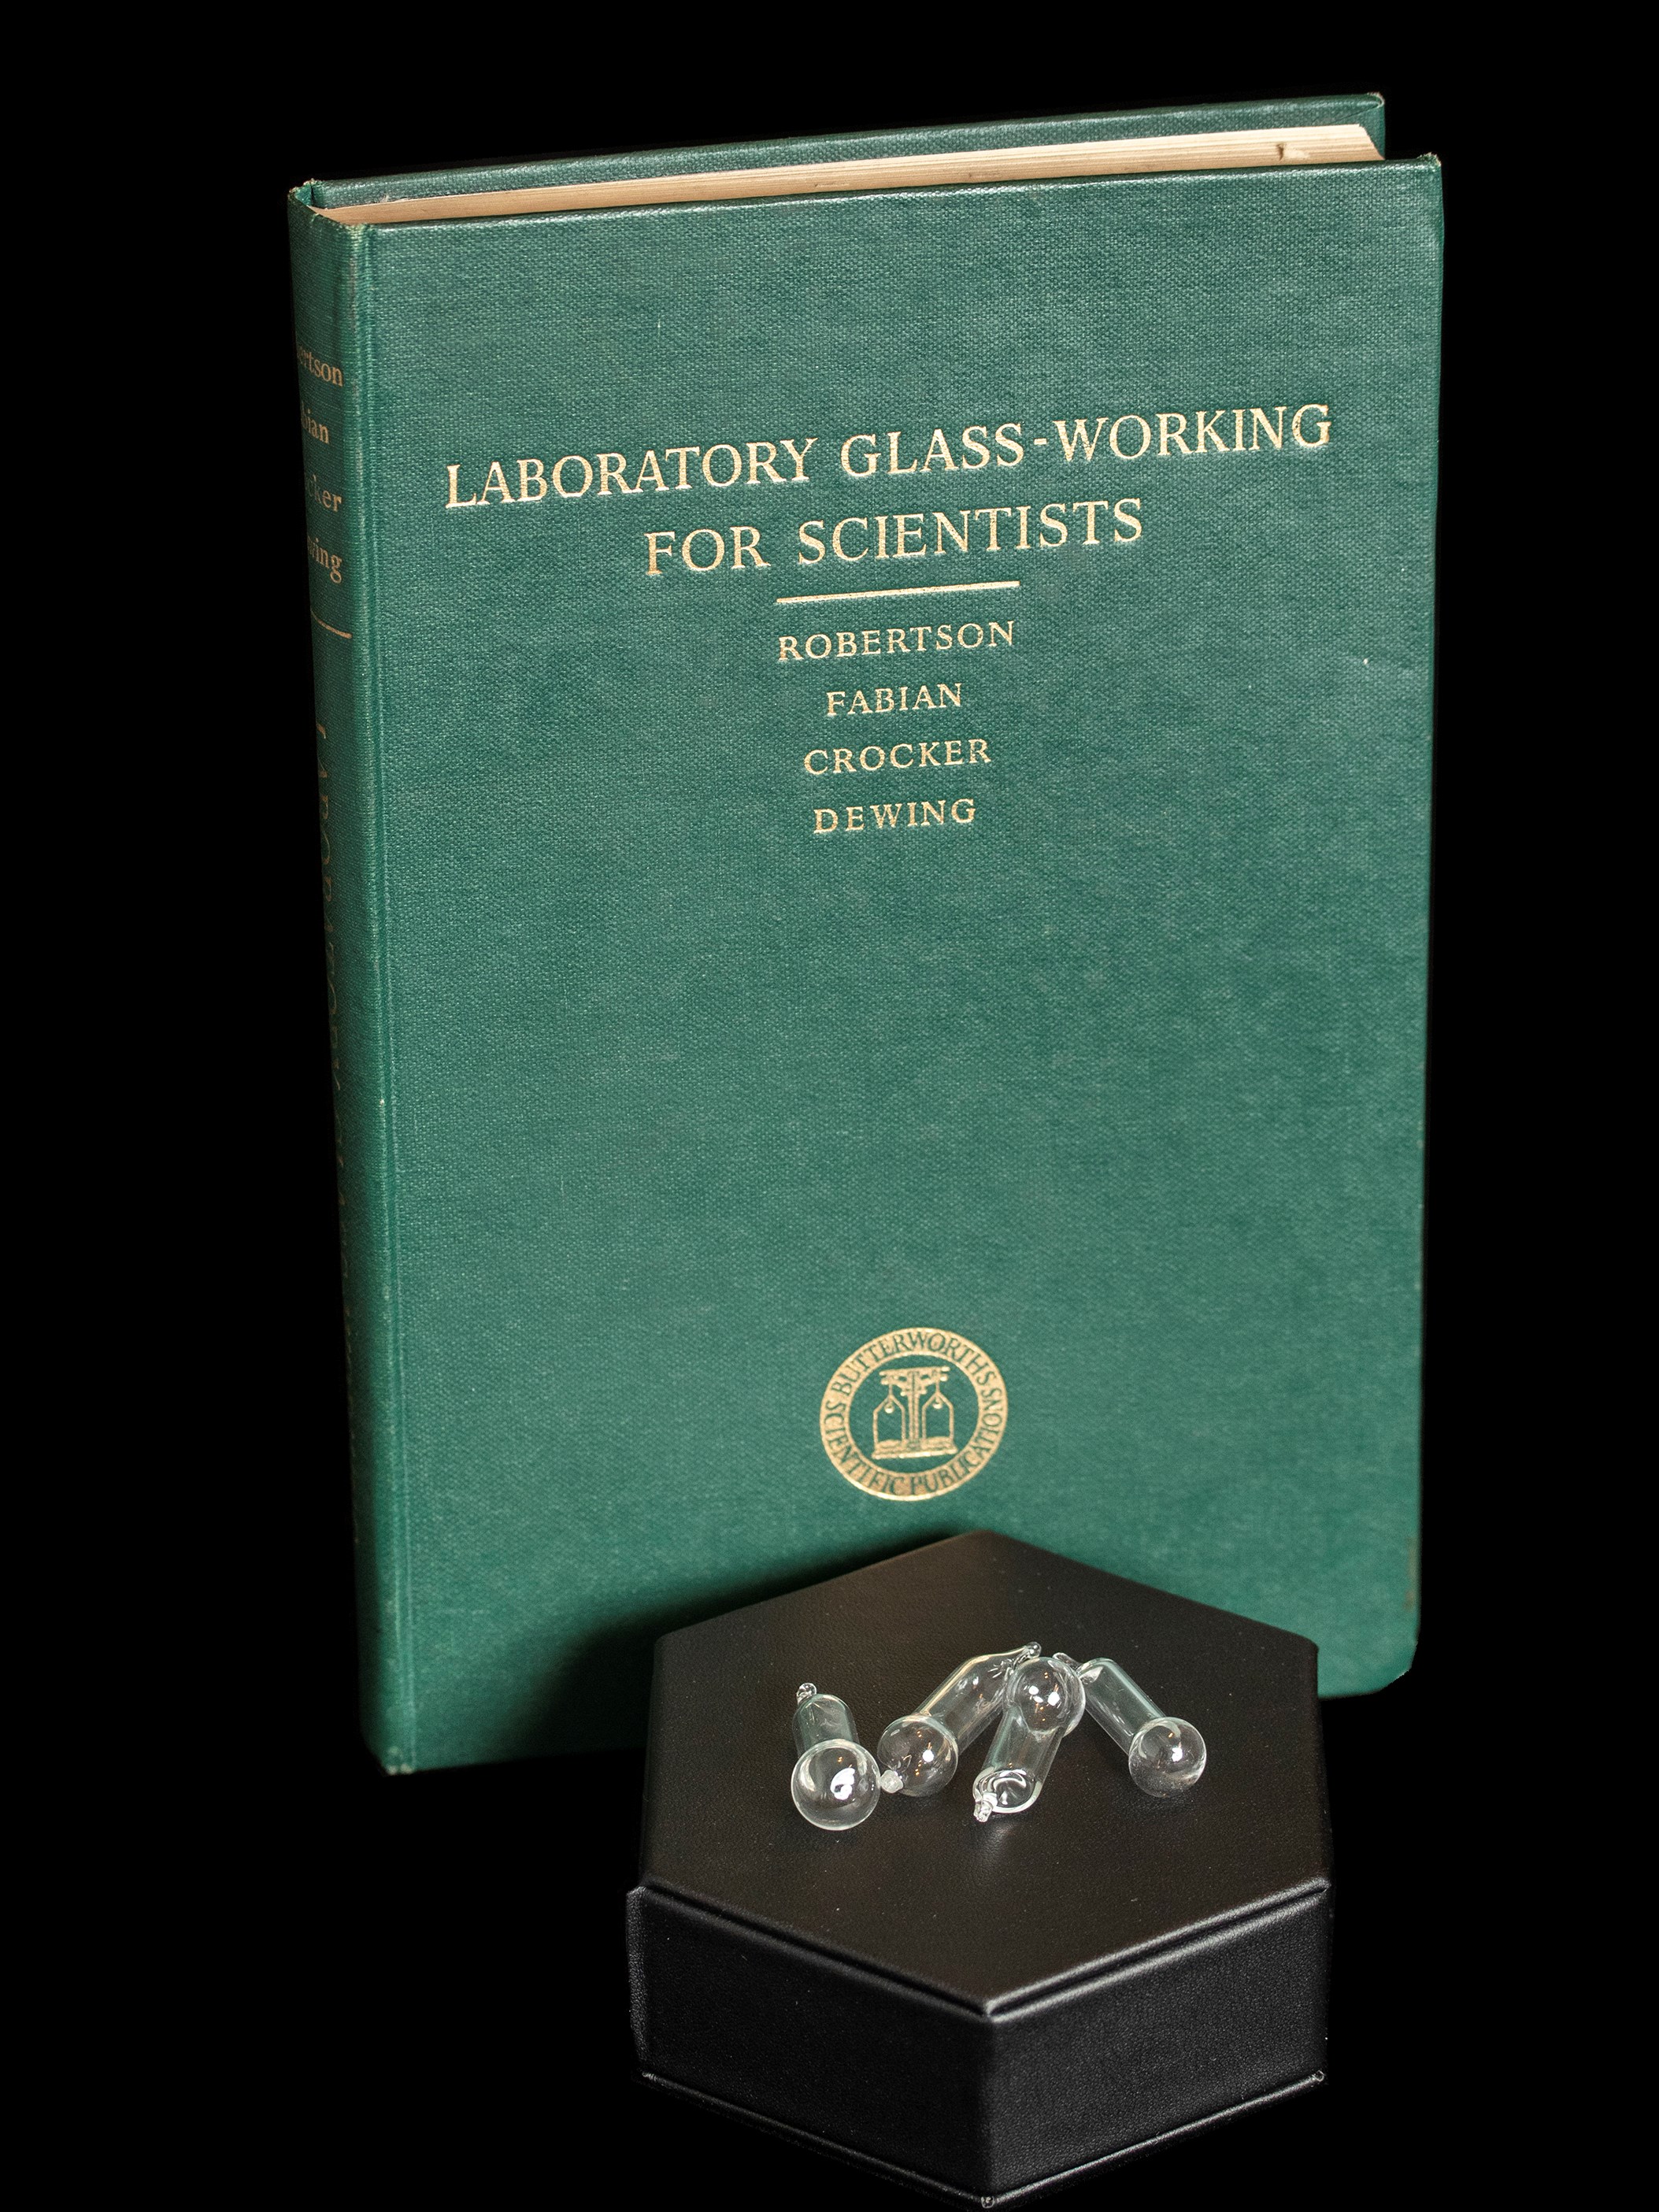 A green book titled "Laboratory Glass-Working for Scientists" standing upright behind a black hexagonal case. On top of the case are four glass test tube stoppers.